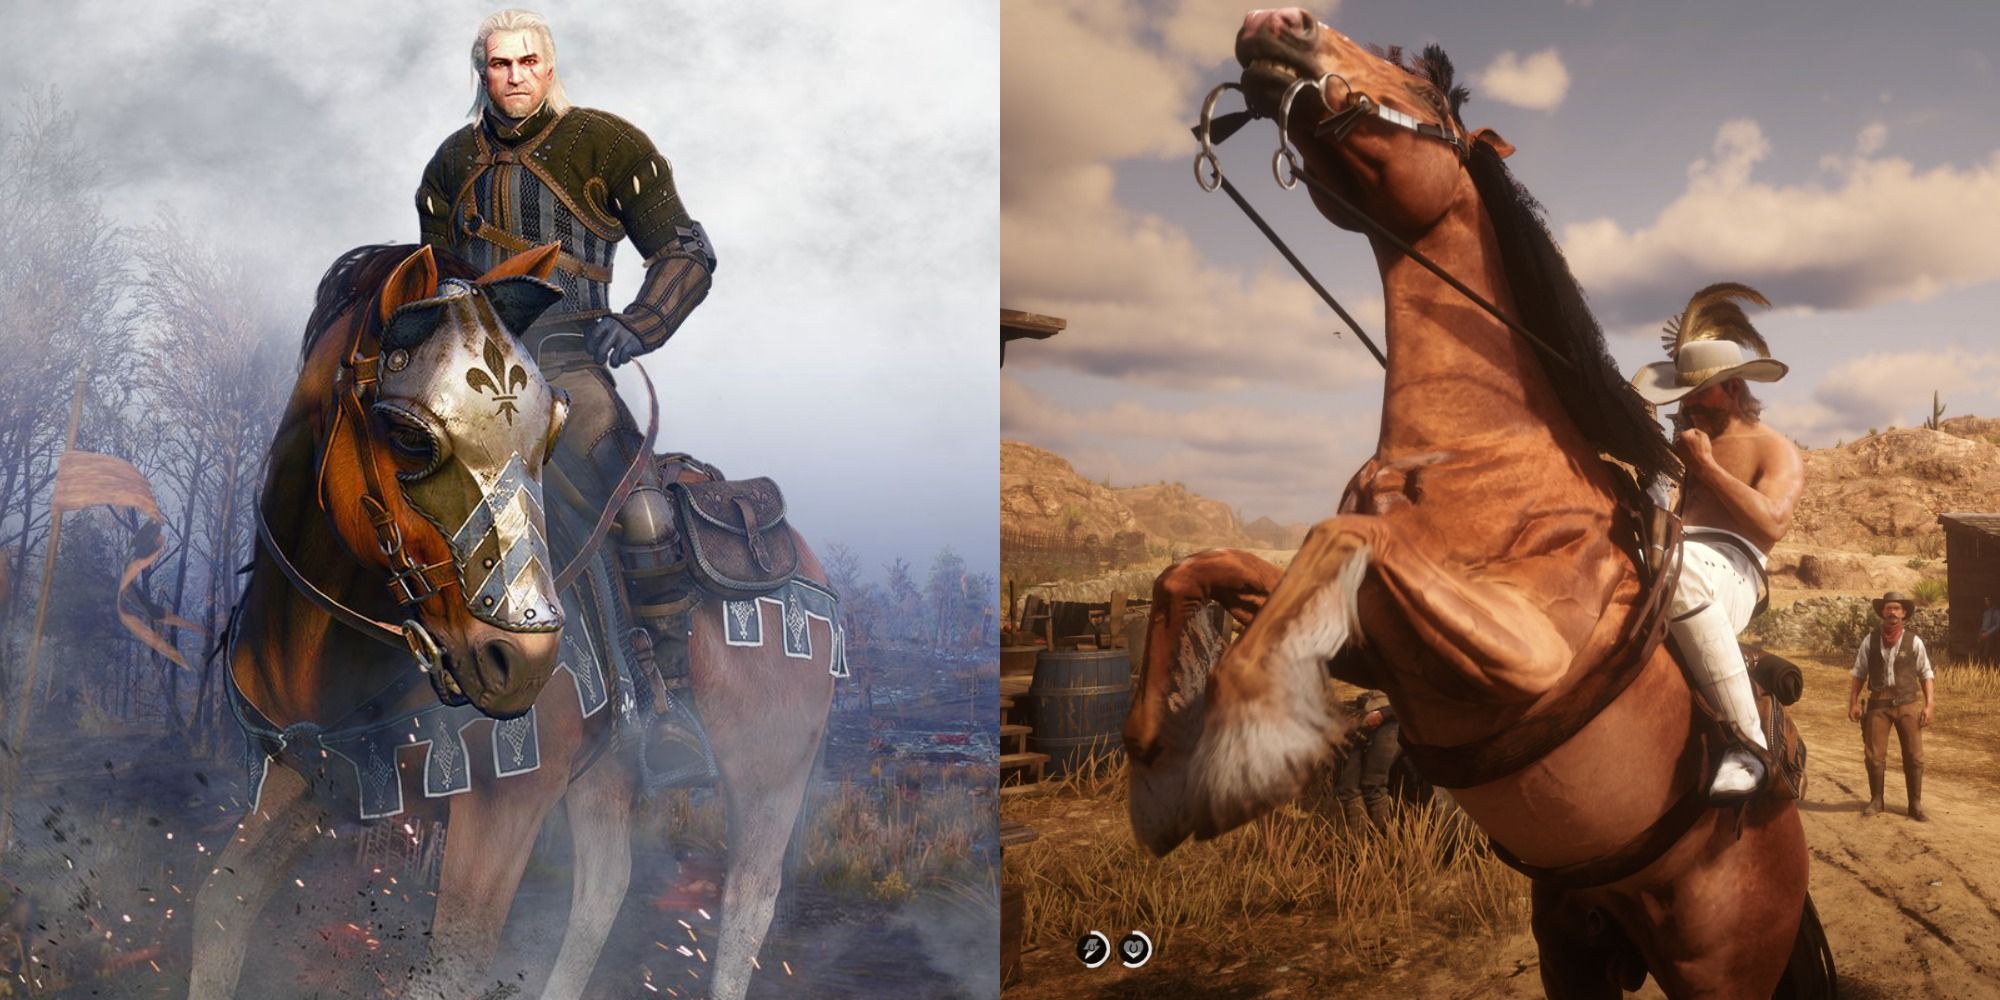 Side by side images of horses in video games